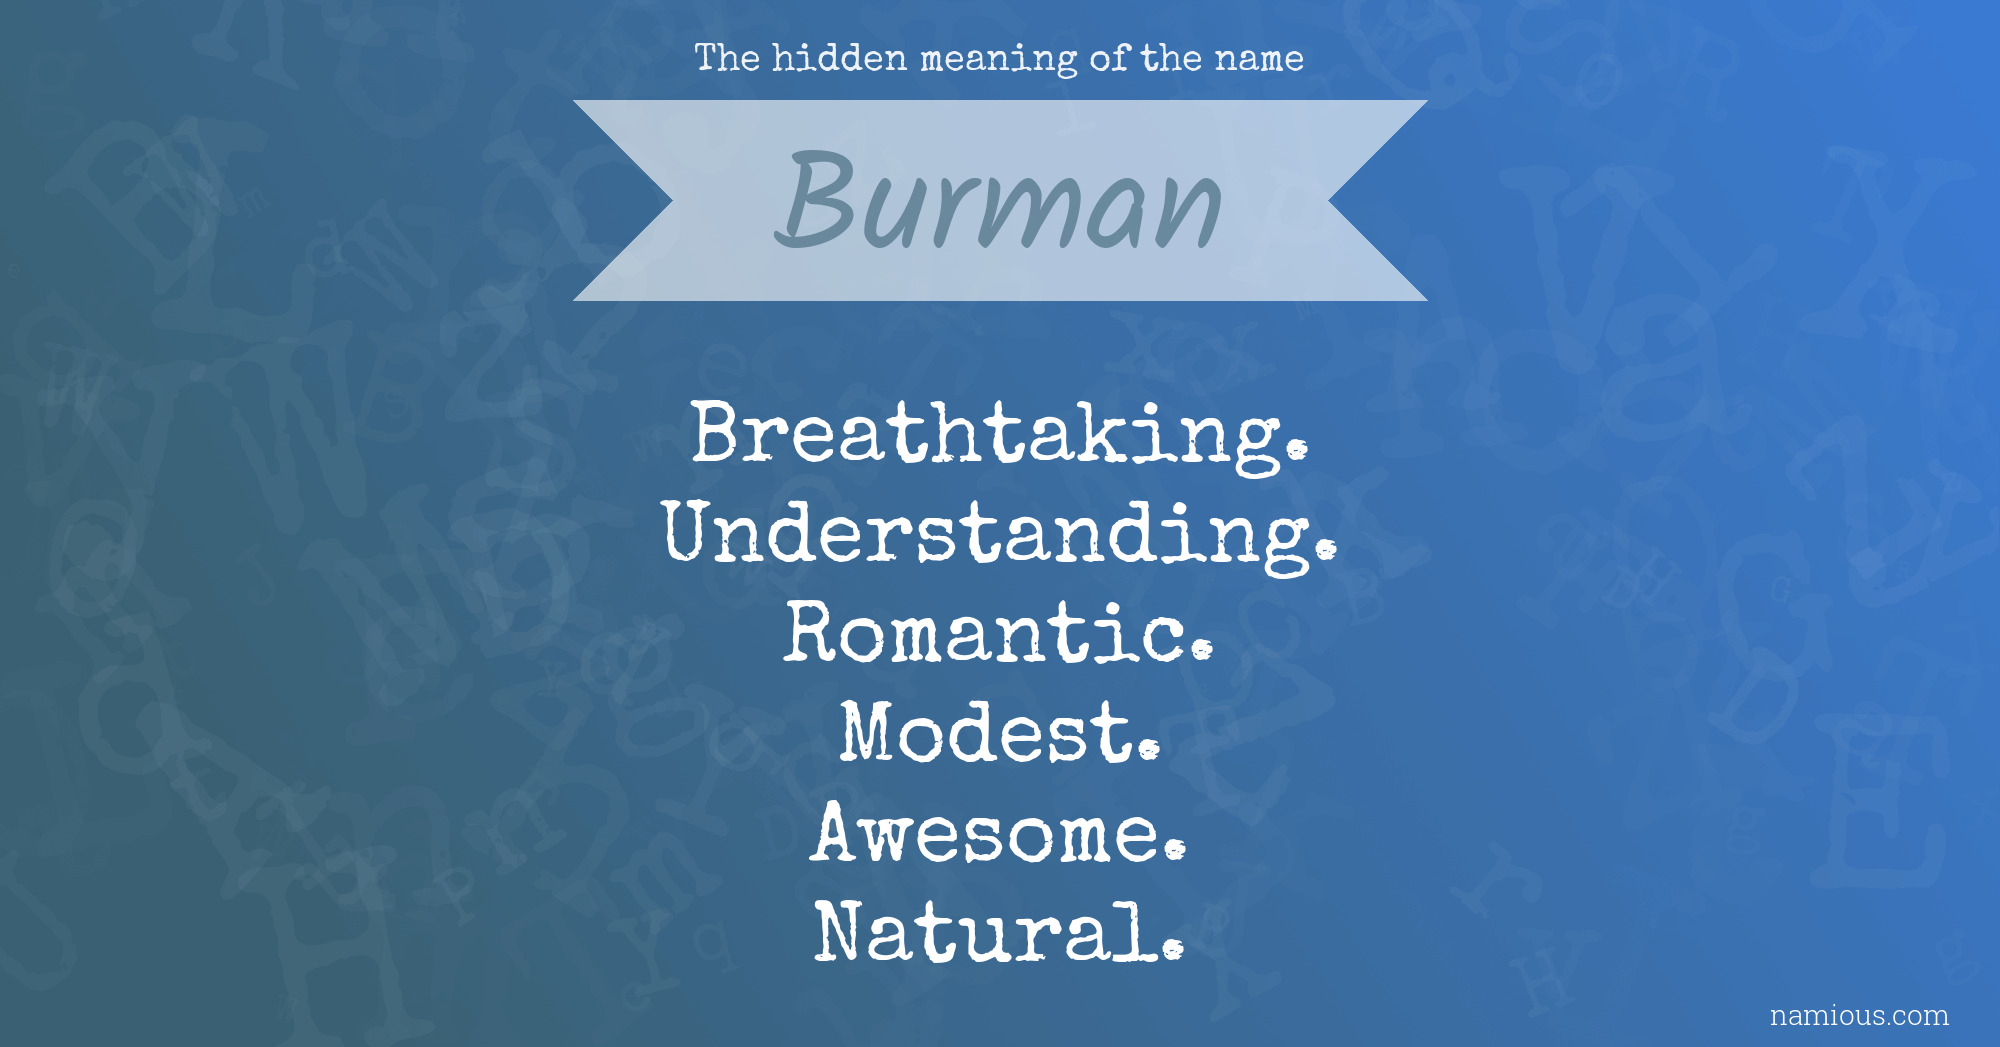 The hidden meaning of the name Burman